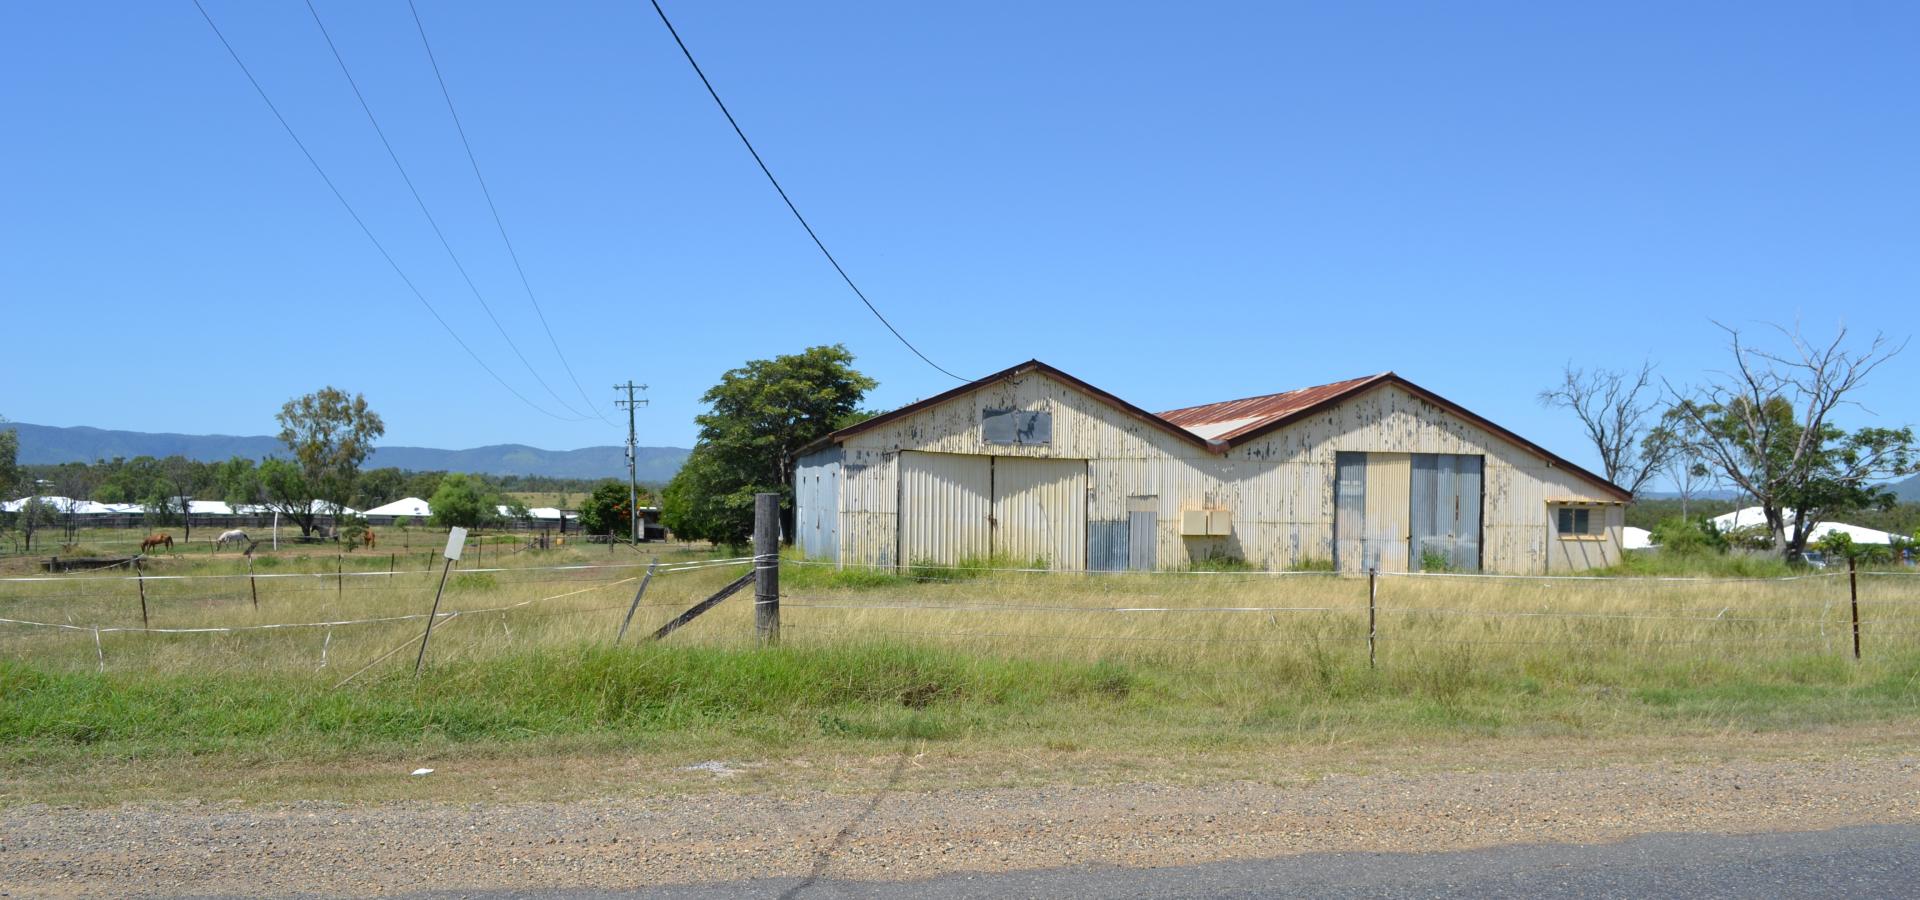 Prime Opportunity for Developers, Investors or Those Wanting to Build Their Dream House on Gracemere Township Acreage